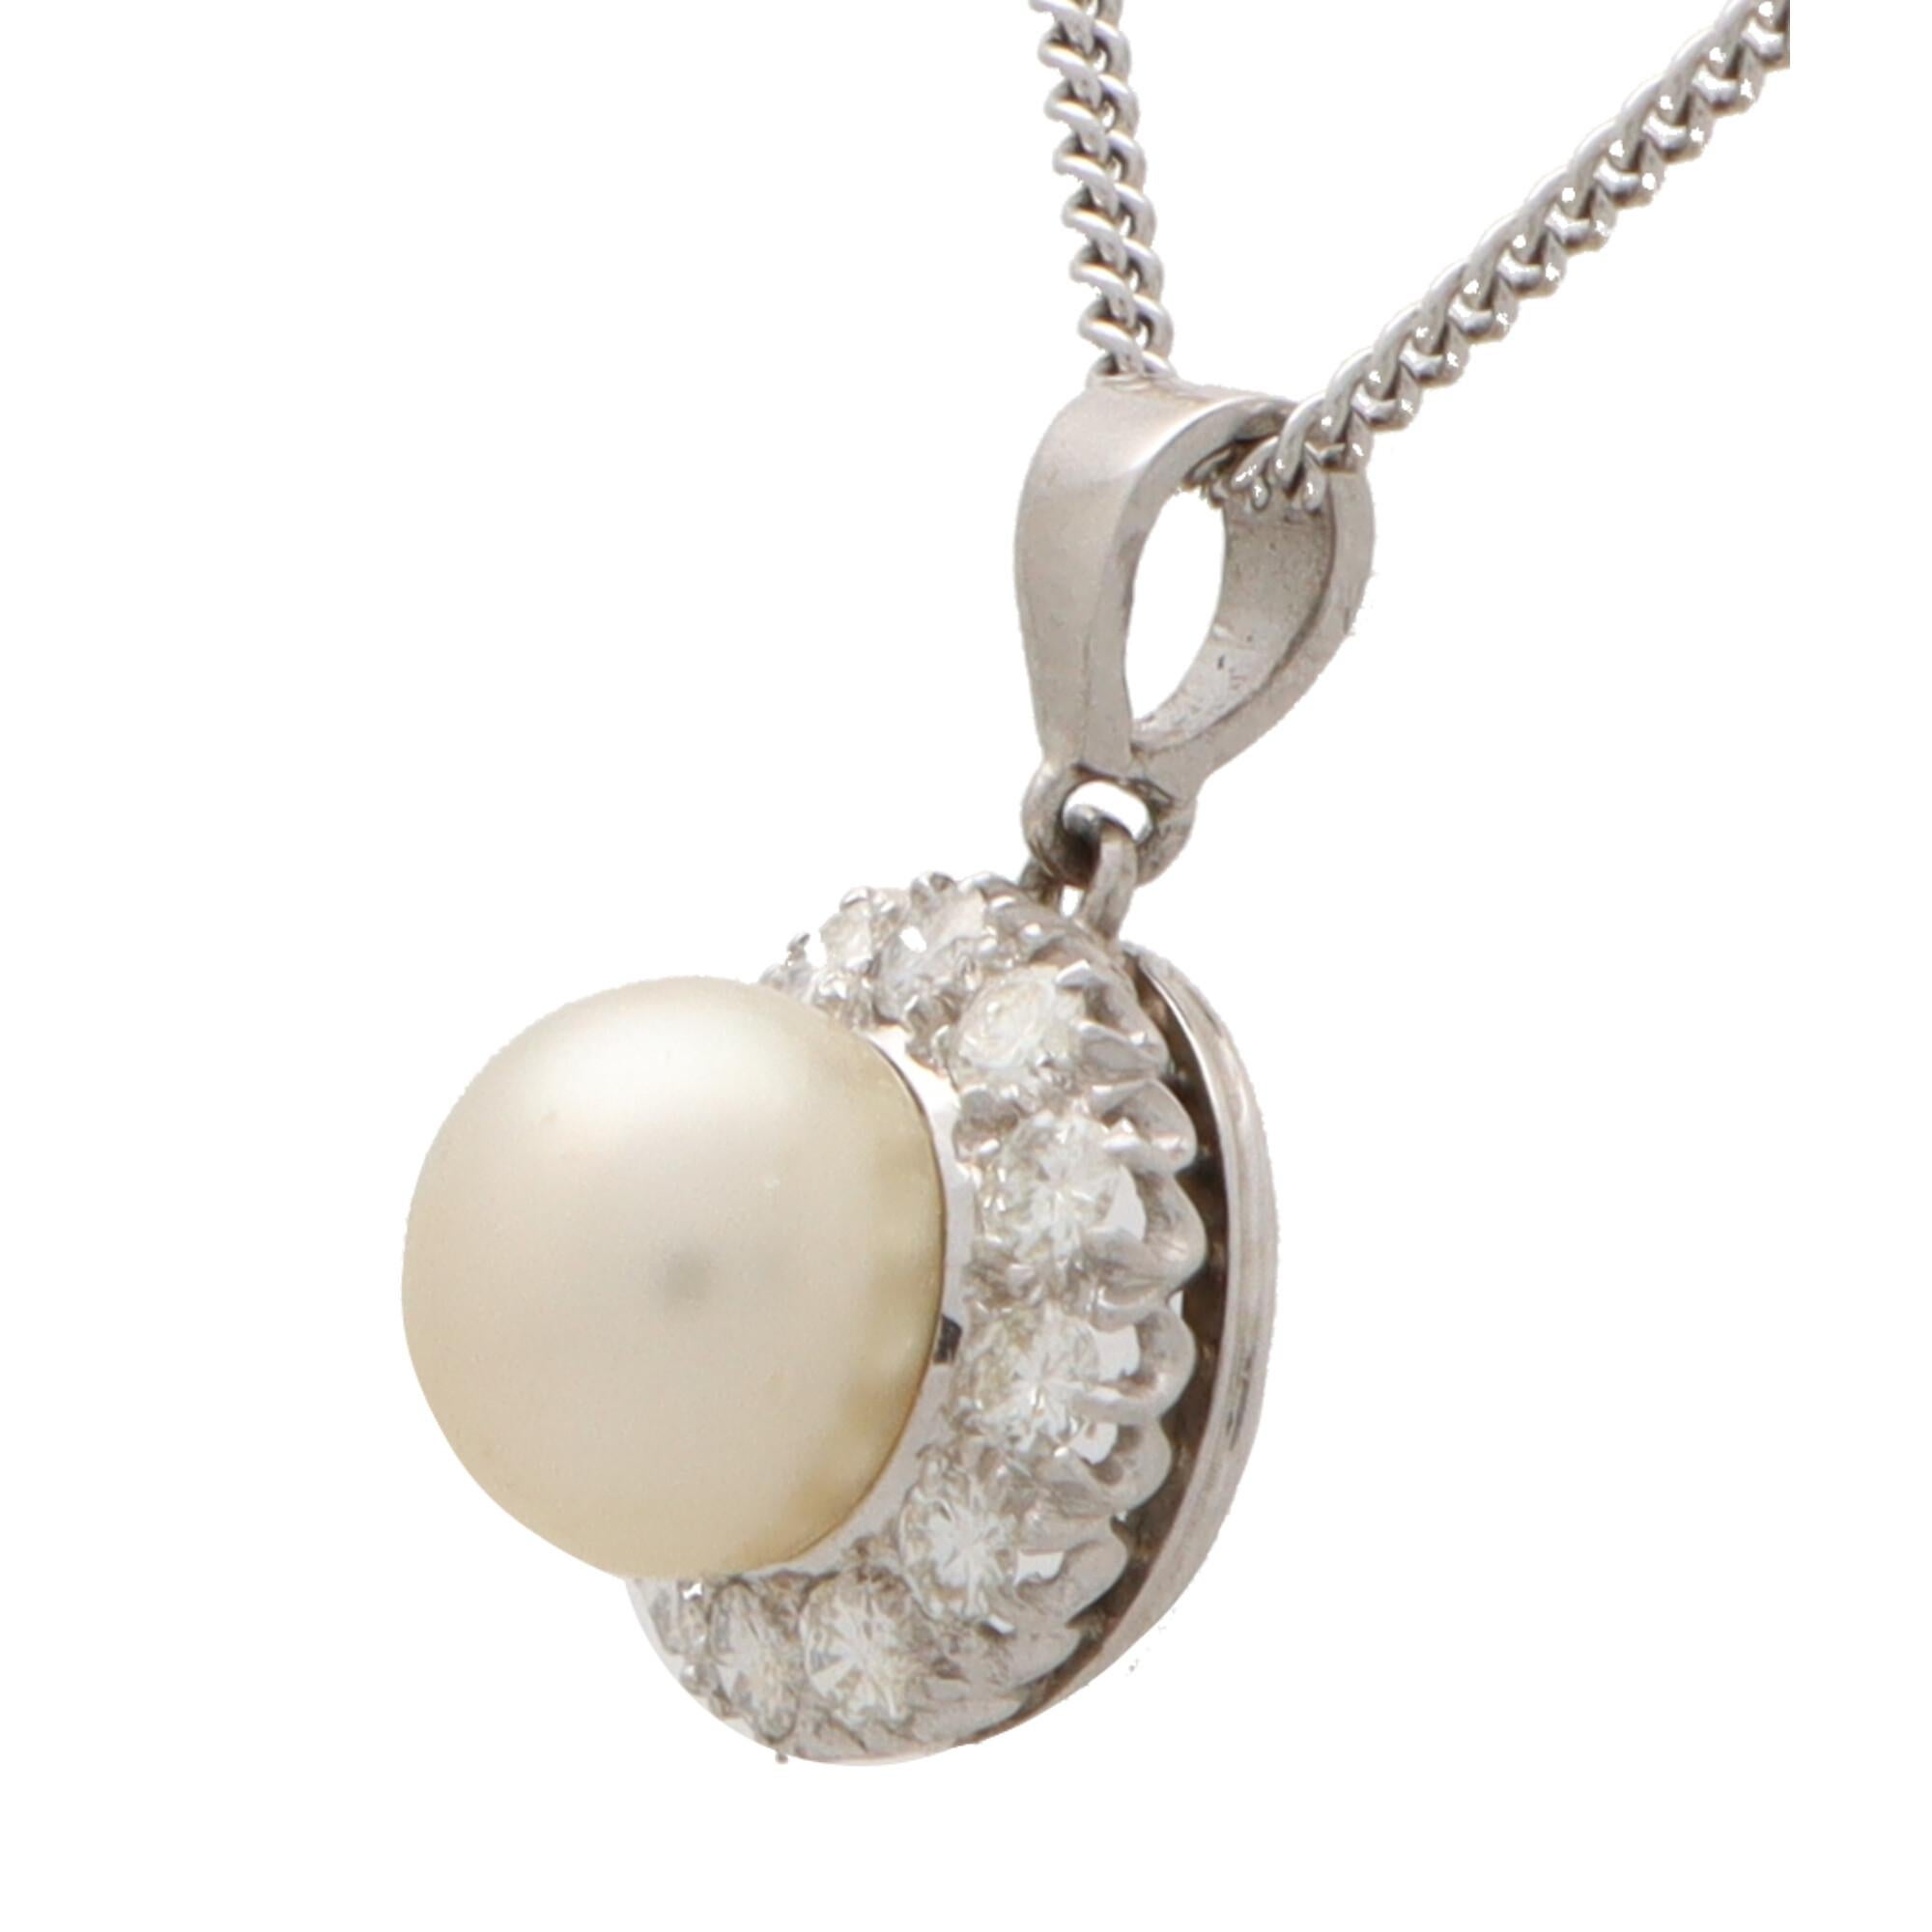 A beautiful diamond and pearl pendant necklace set in 9k white gold.

The pendant is composed of simple circular drop set centrally with a lustrous cream saltwater cultured pearl. The drop is set with a total of 12 round brilliant cut diamonds. It